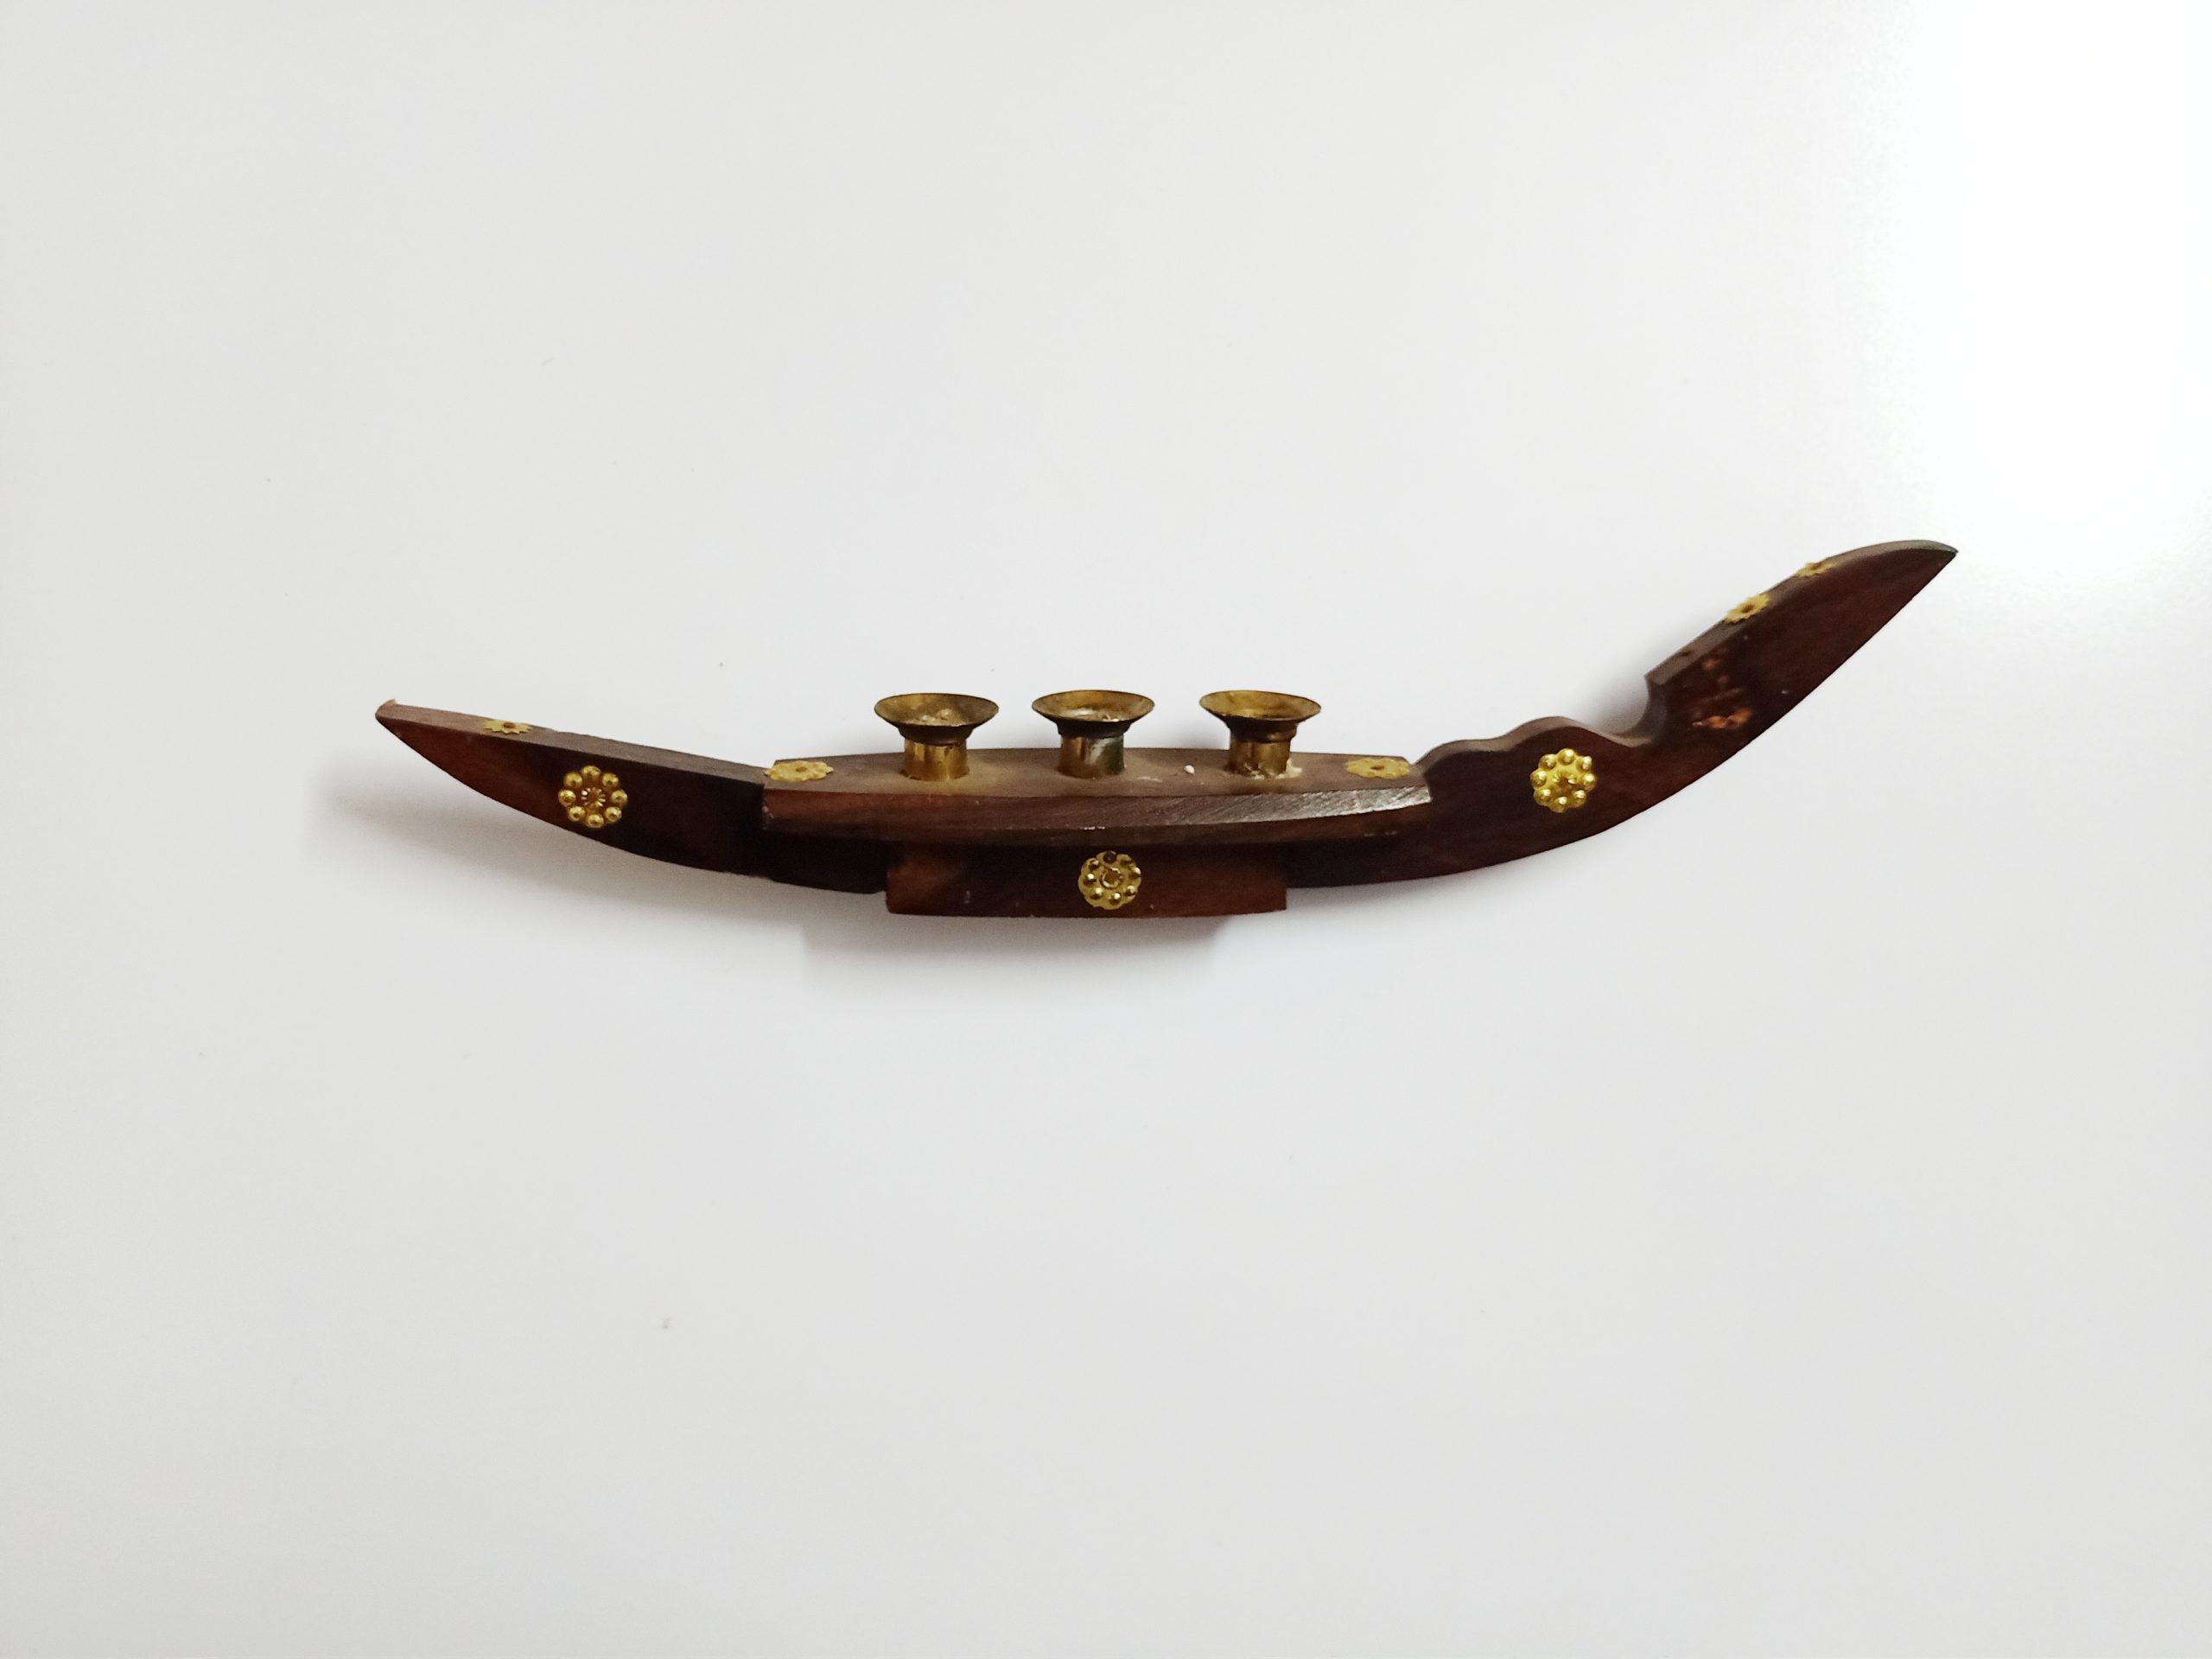 A wooden boat toy